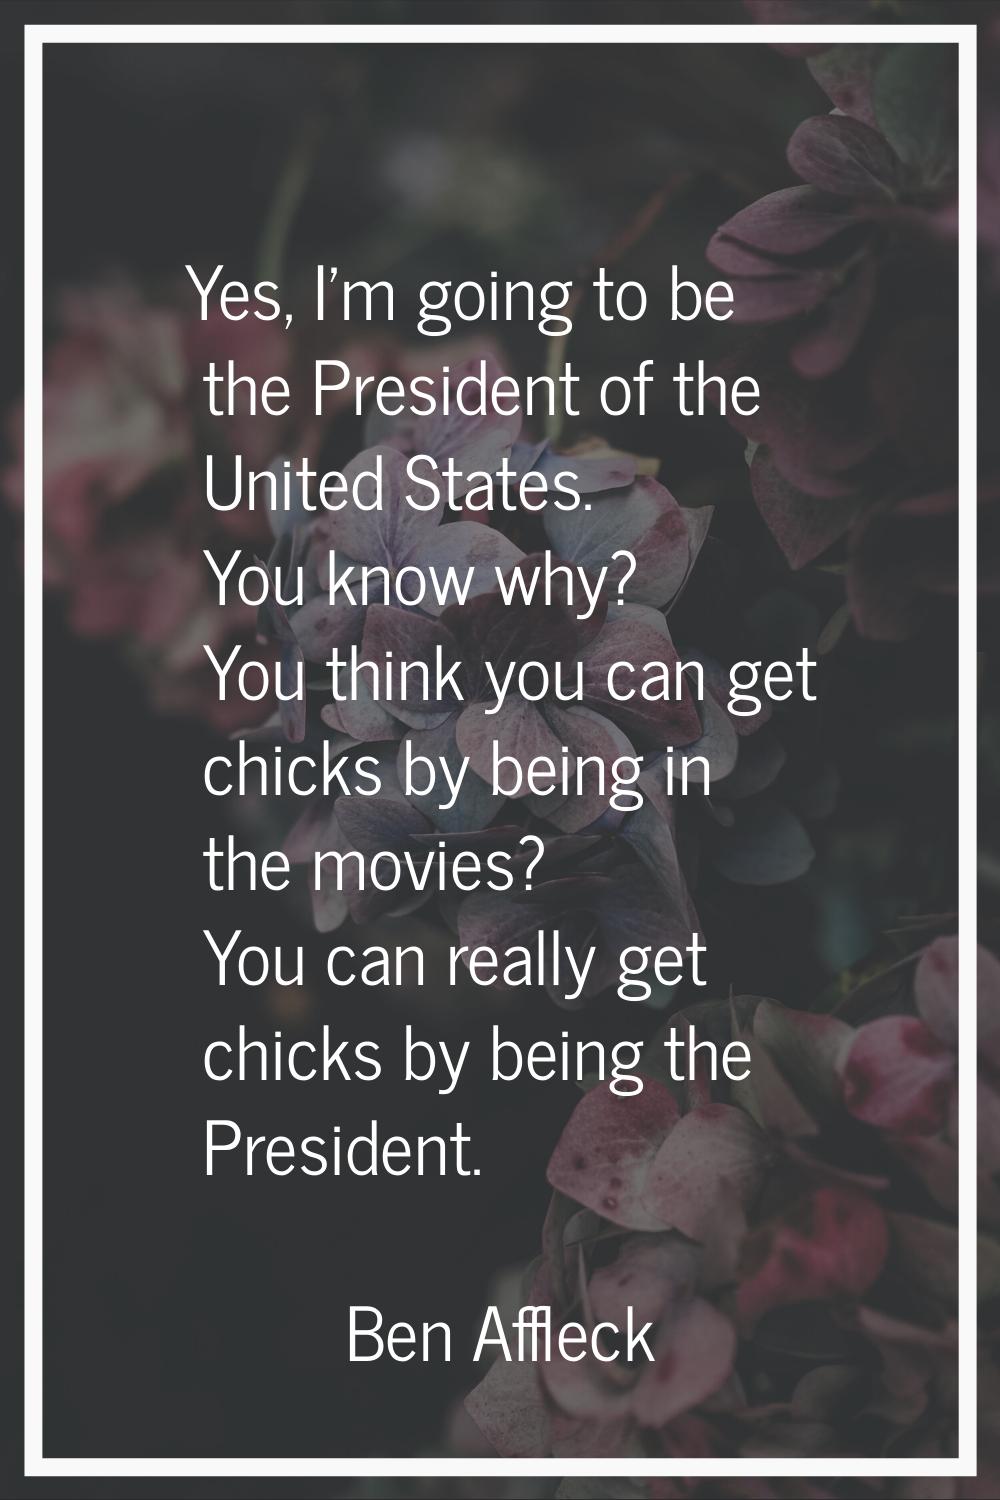 Yes, I'm going to be the President of the United States. You know why? You think you can get chicks